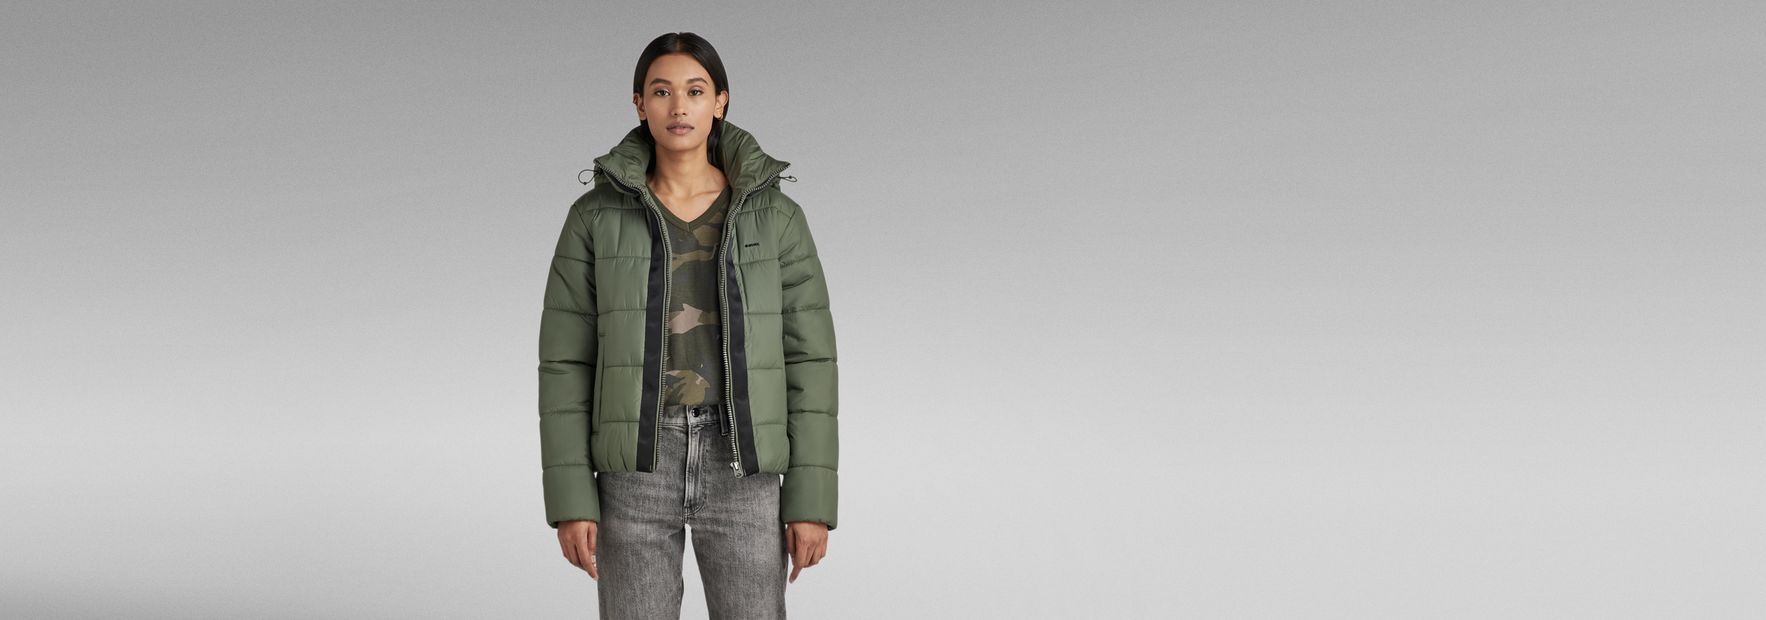 Meefic Hooded Quilted Jacket | Green | G-Star RAW® US